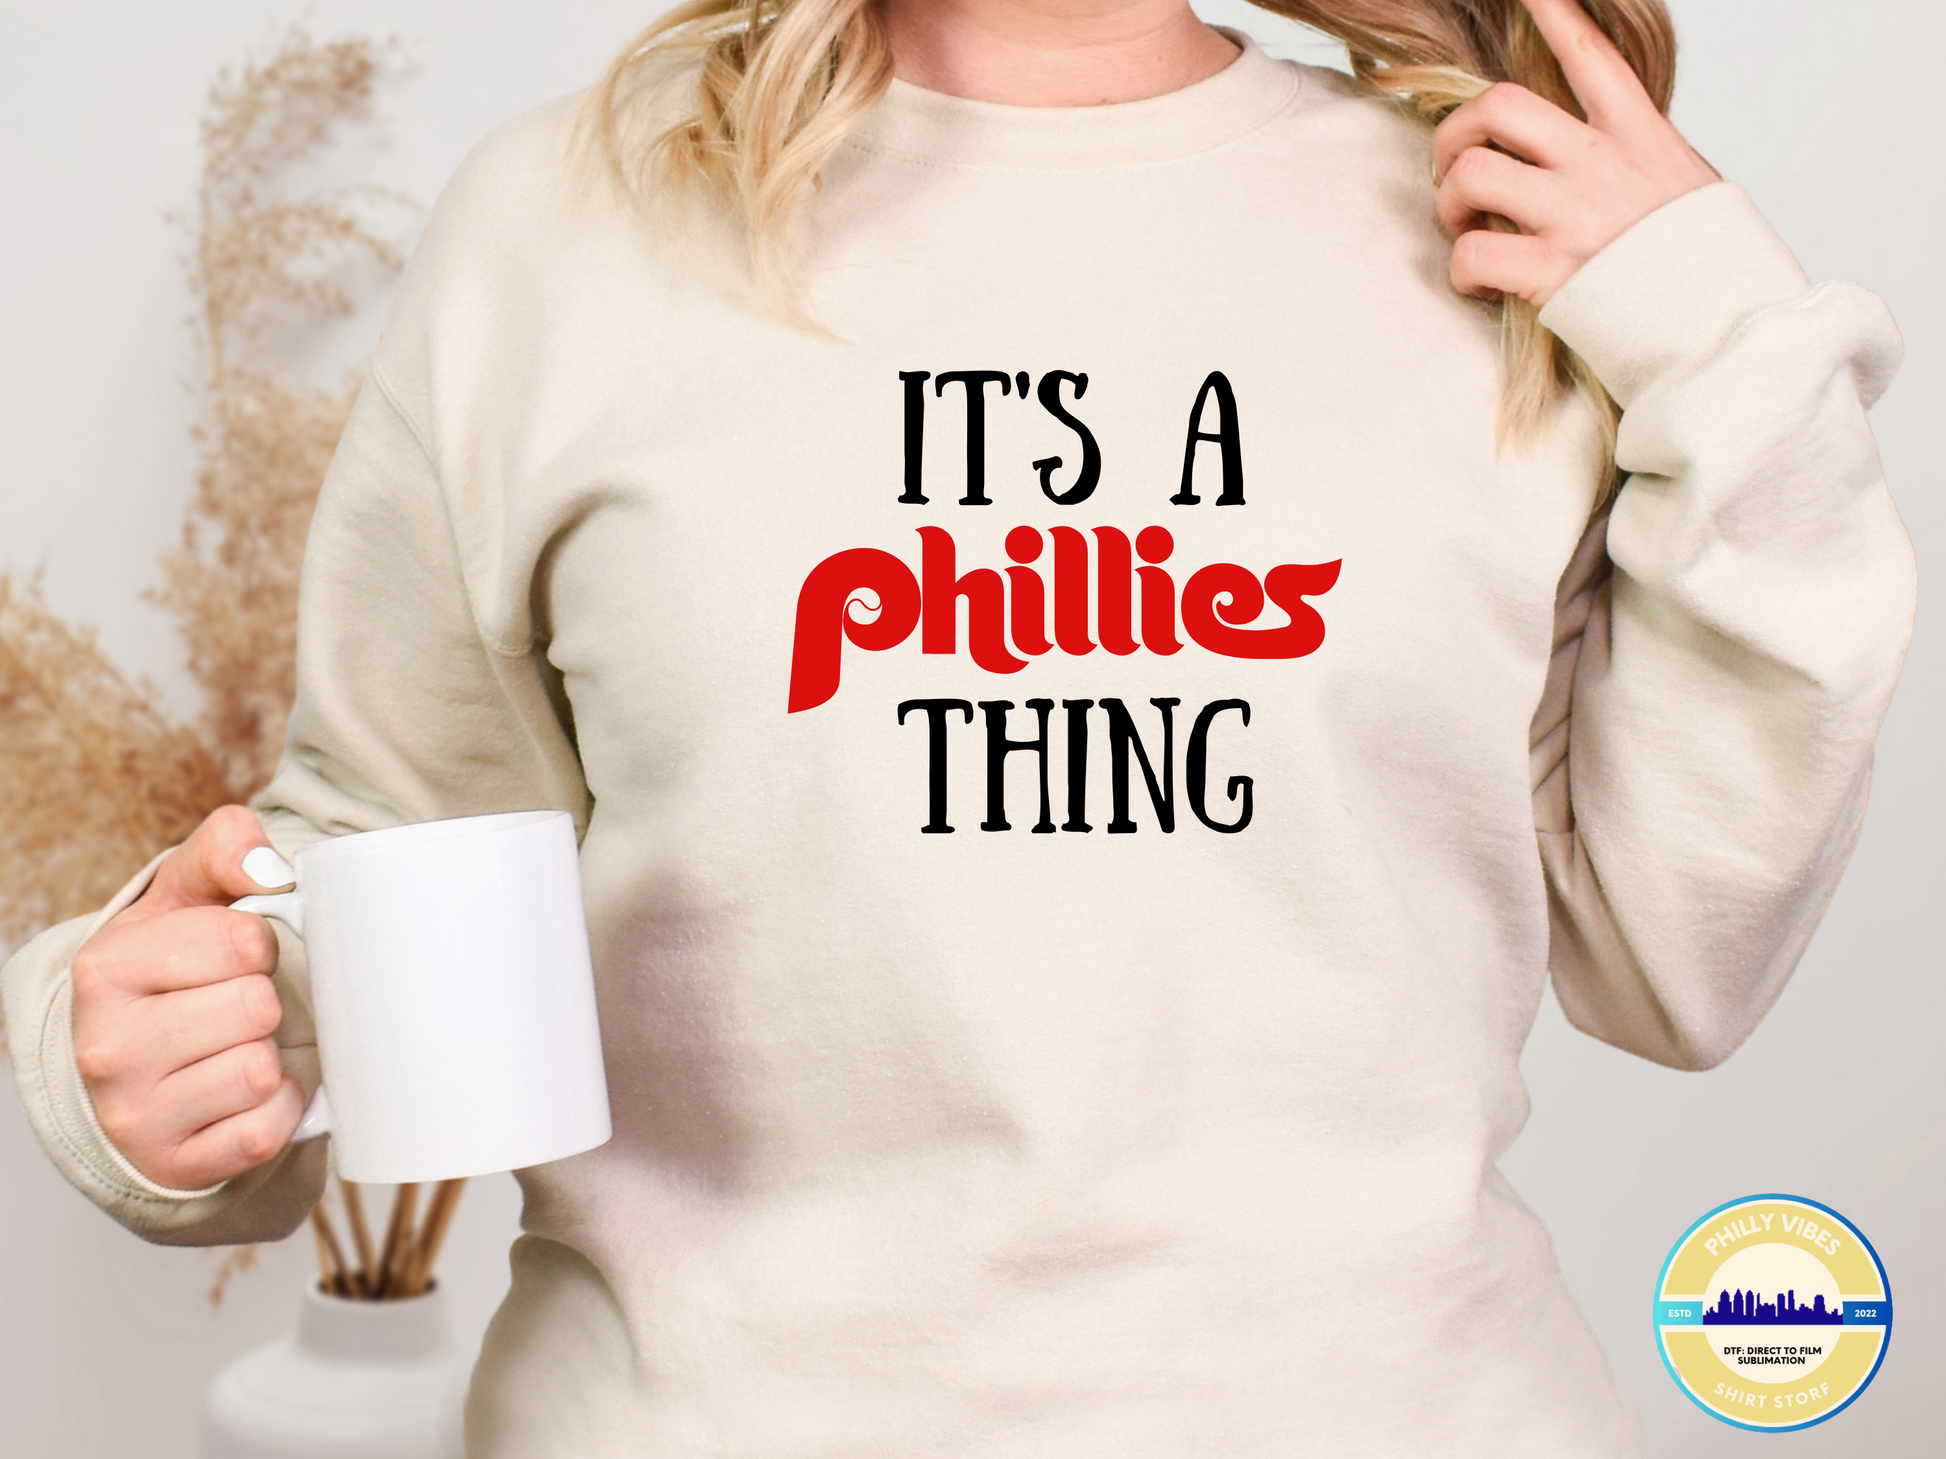 Jawn Its A Philly Thing Shirt Ladies T-shirt